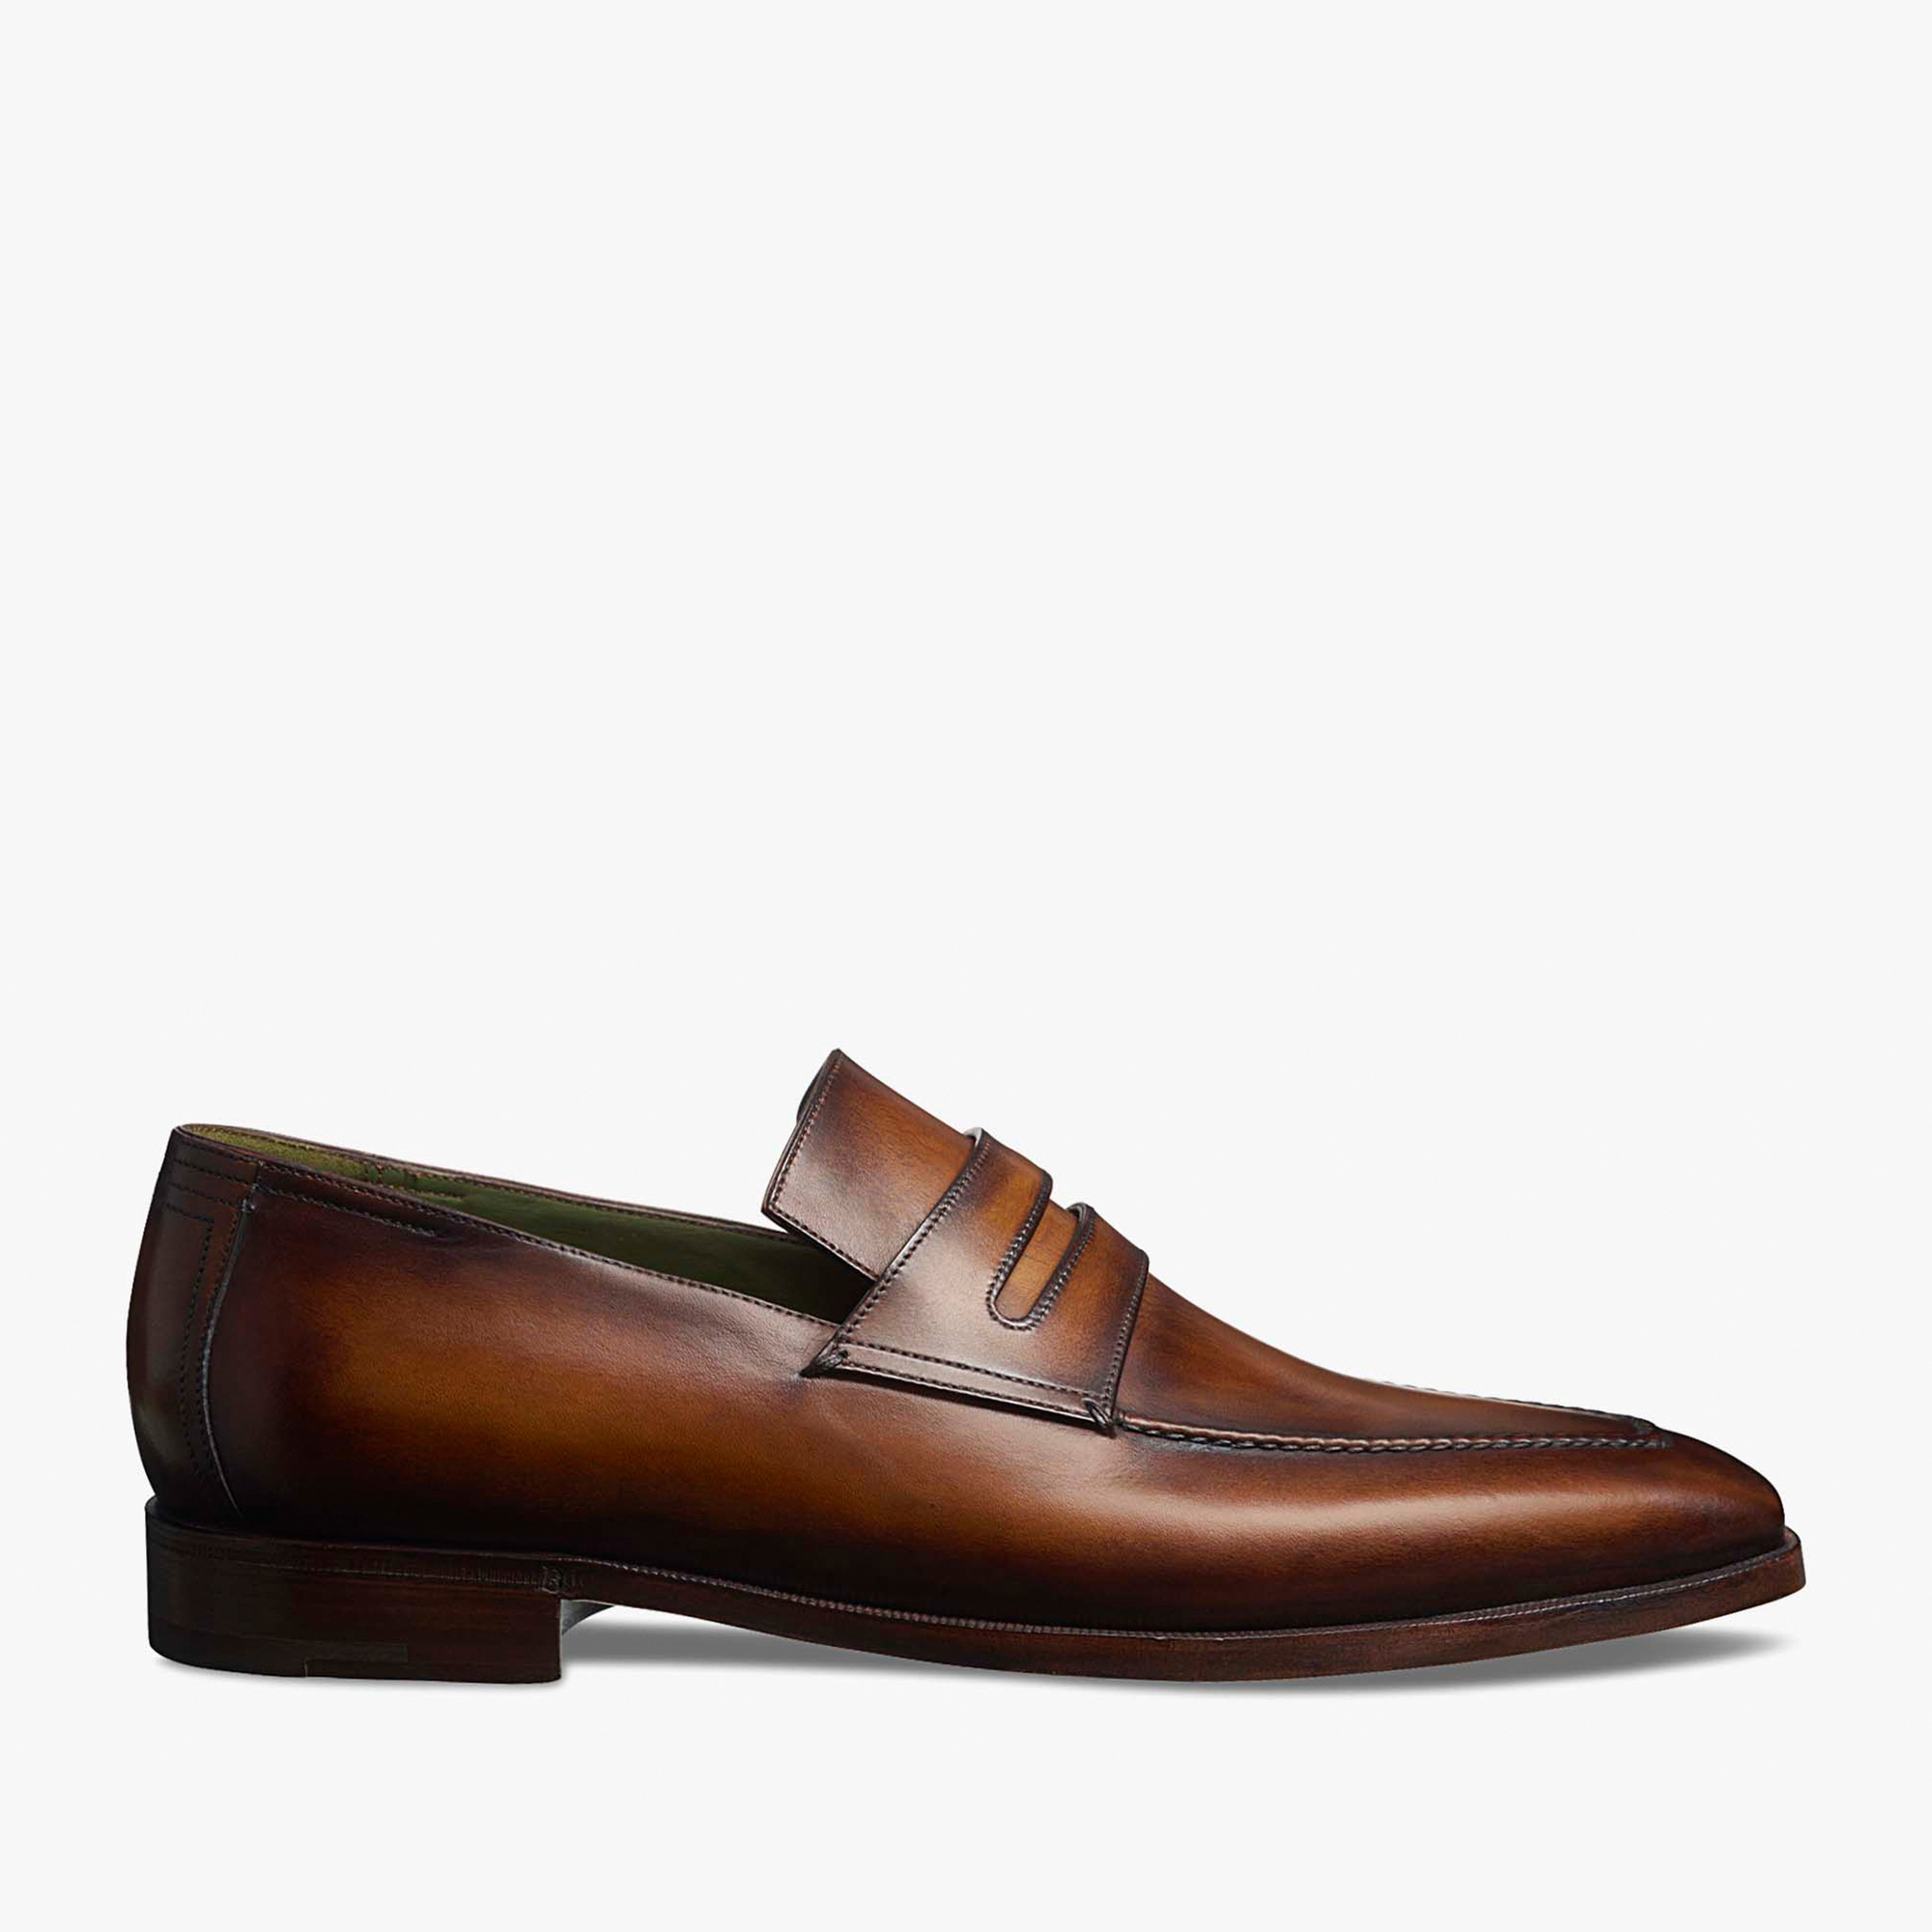 Andy Demesure Leather Loafer, TOBACCO BIS, hi-res